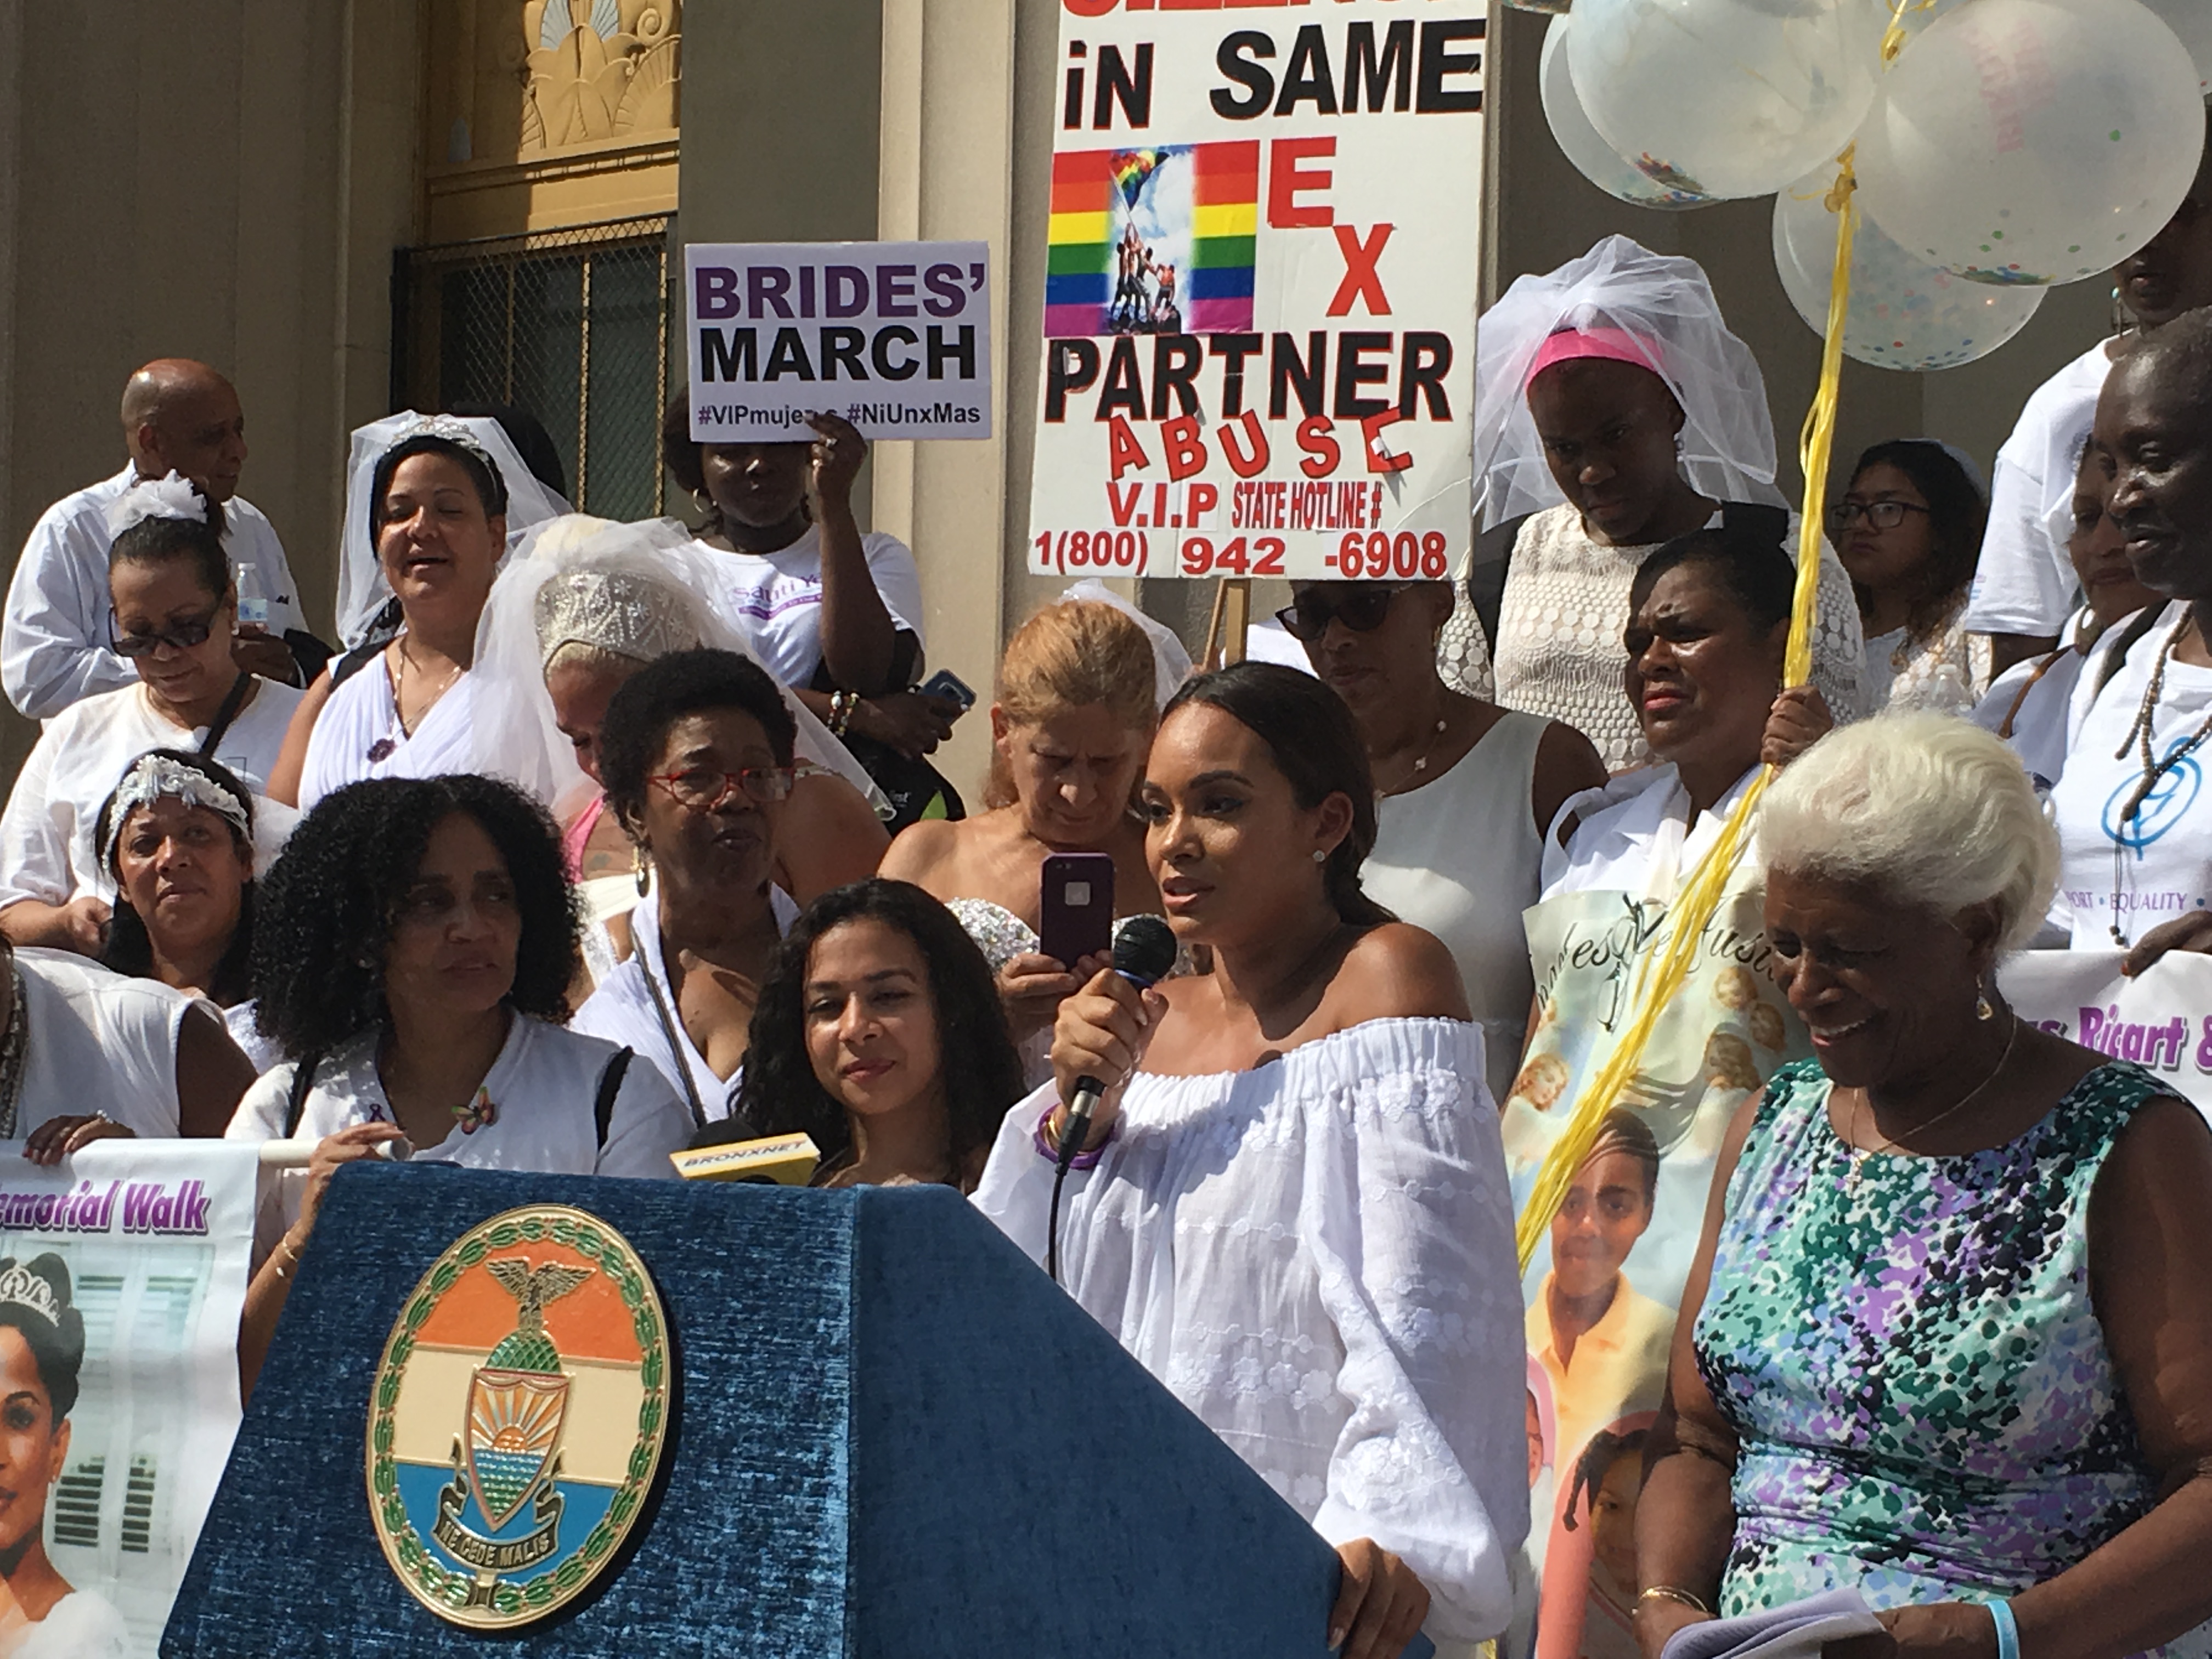 Basketball Wives” Evelyn Lozada Leads NYC March Against Domestic Violence pic